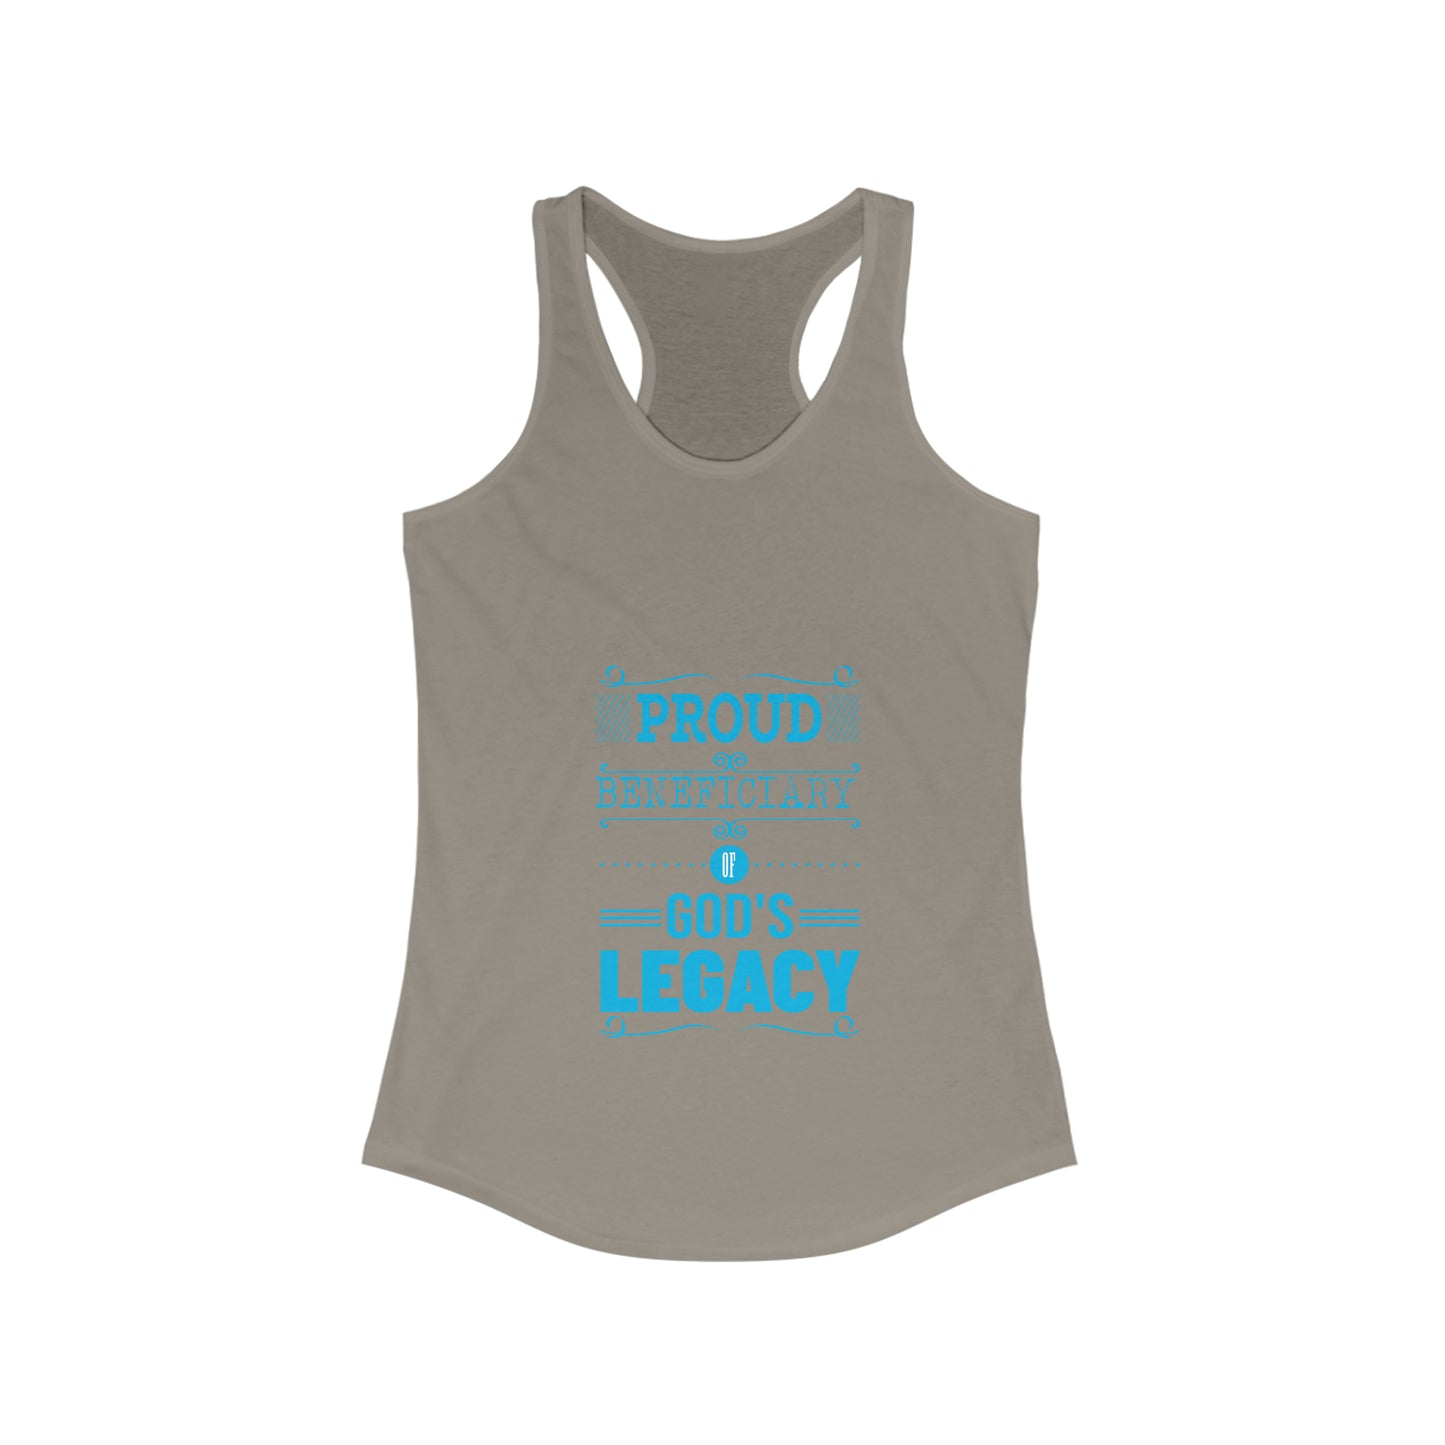 Proud Beneficiary Of God's Legacy Slim Fit Tank-top